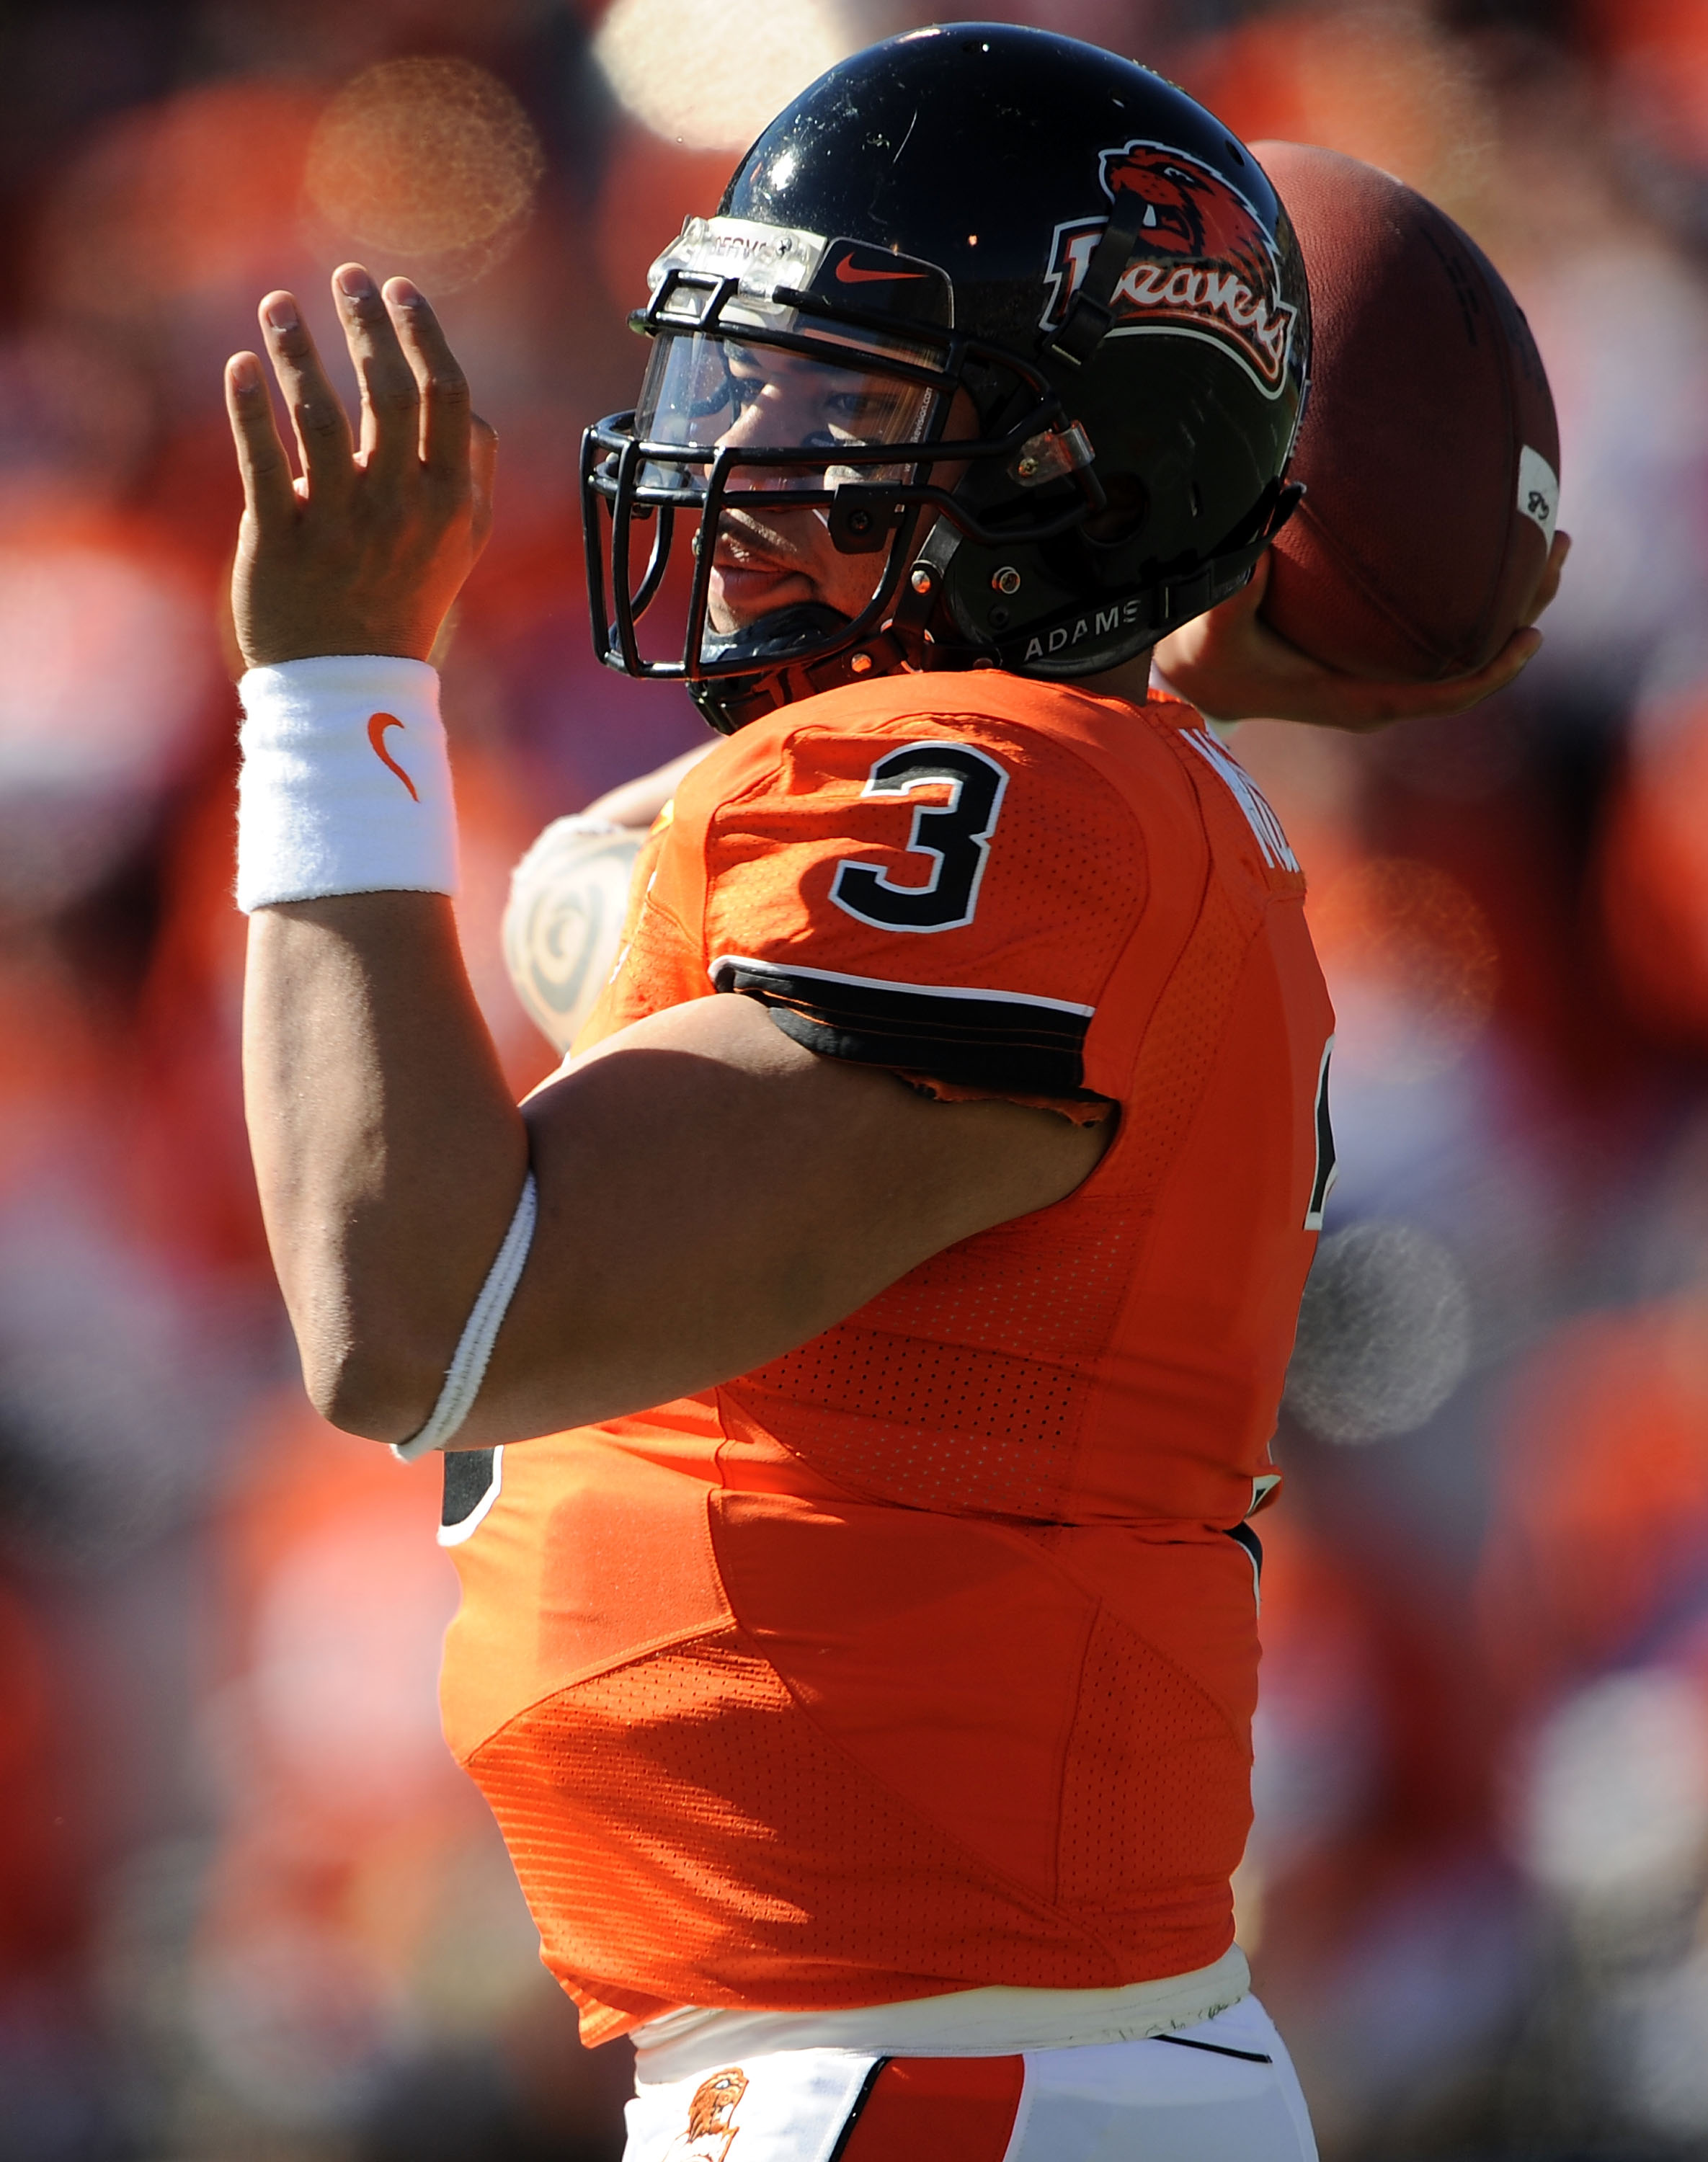 EL PASO, TX - DECEMBER 31:  Quarterback Lyle Moevao #3 of the Oregon State Beavers drops back to pass against the Pittsburgh Panthers during the Brut Sun Bowl on December 31, 2008 at the Sun Bowl in El Paso, Texas.  (Photo by Ronald Martinez/Getty Images)